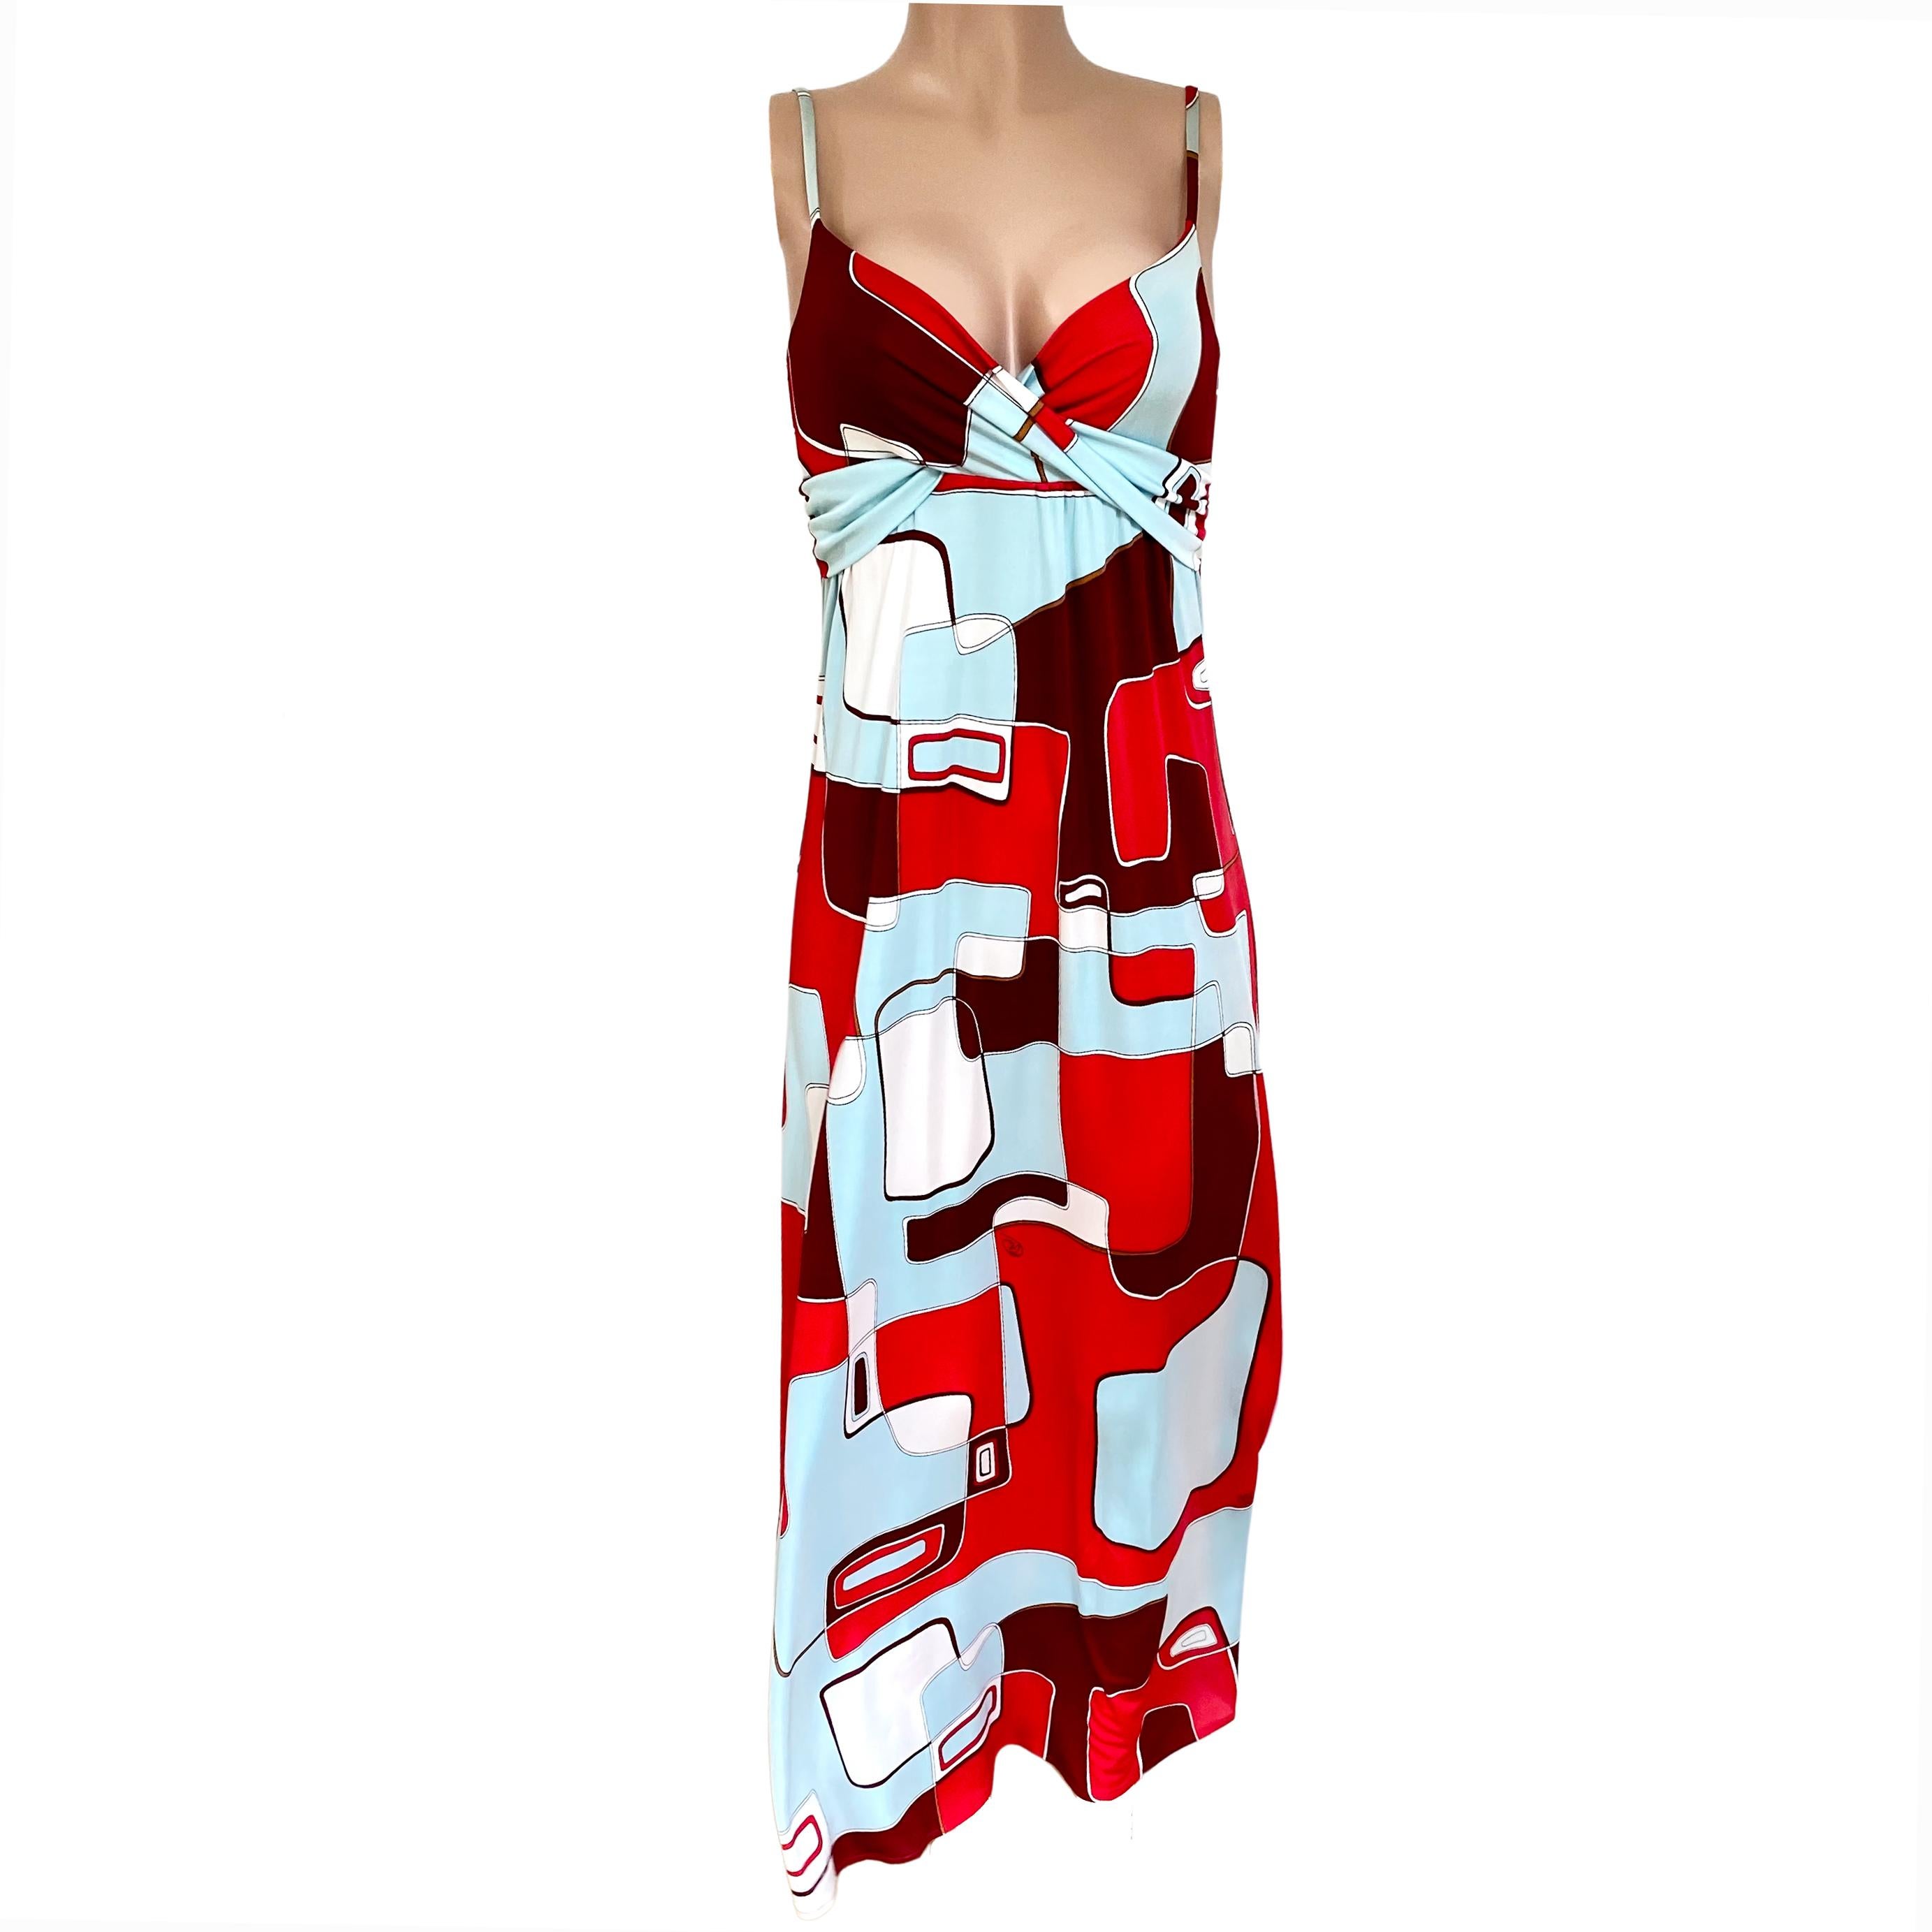 Easy Breezy beautiful maxi dress in luxurious silk jersey.
Abstract red aqua print silk jersey boho maxi dress
Original freehand signed print from Flora Kung.
Adjustable straps for a perfect fit.
Approximately 60